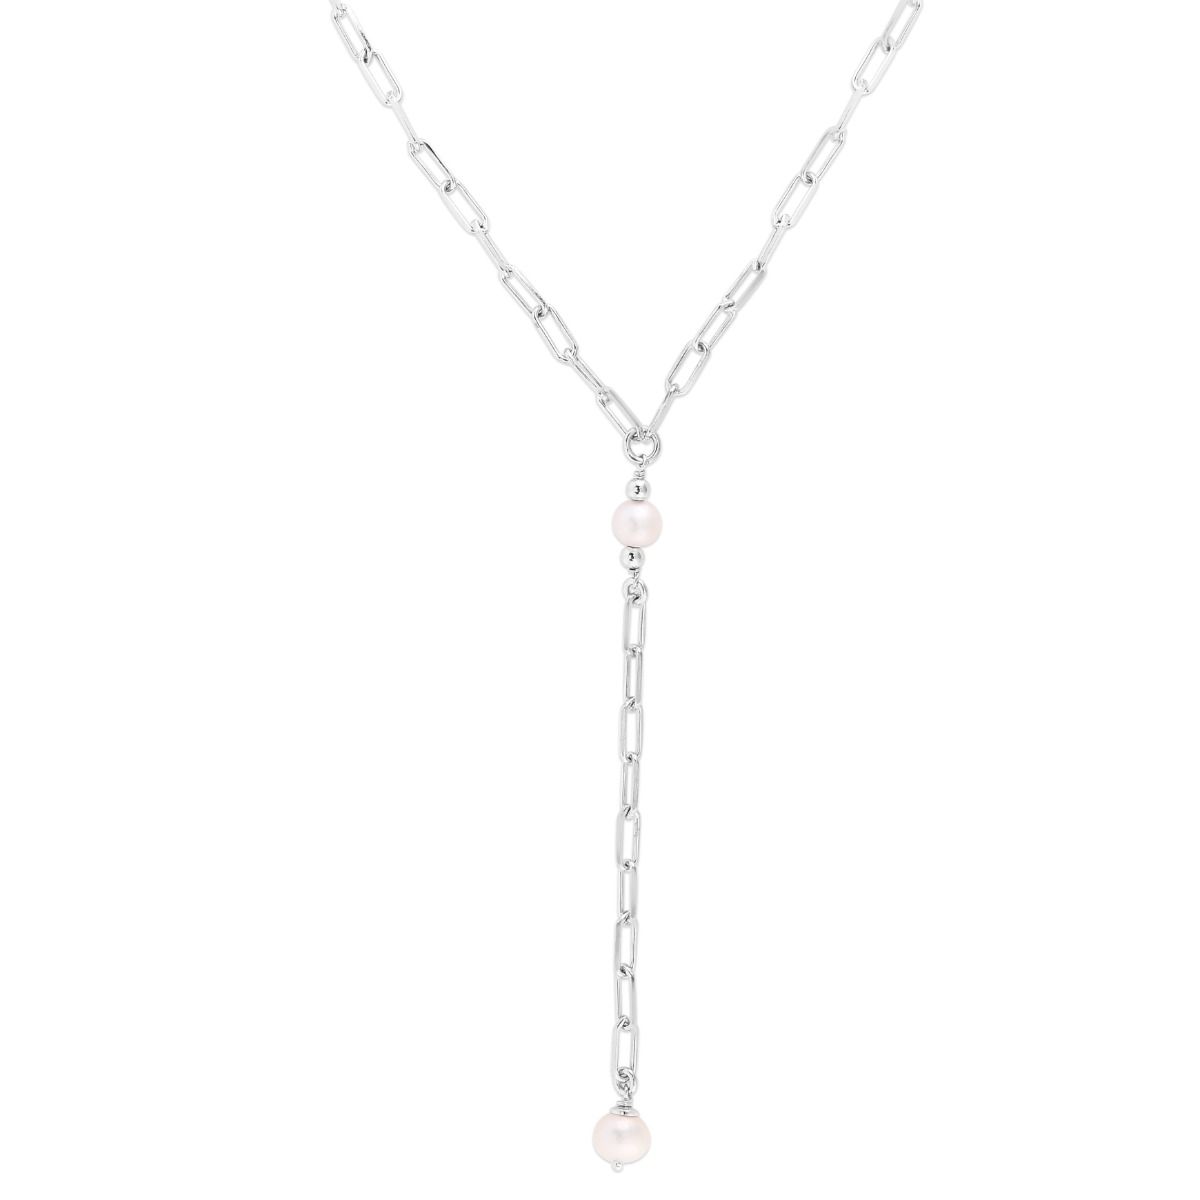 Camellia Lariat Necklace in Silver (More Colors Available) - BeachBu, LLC.